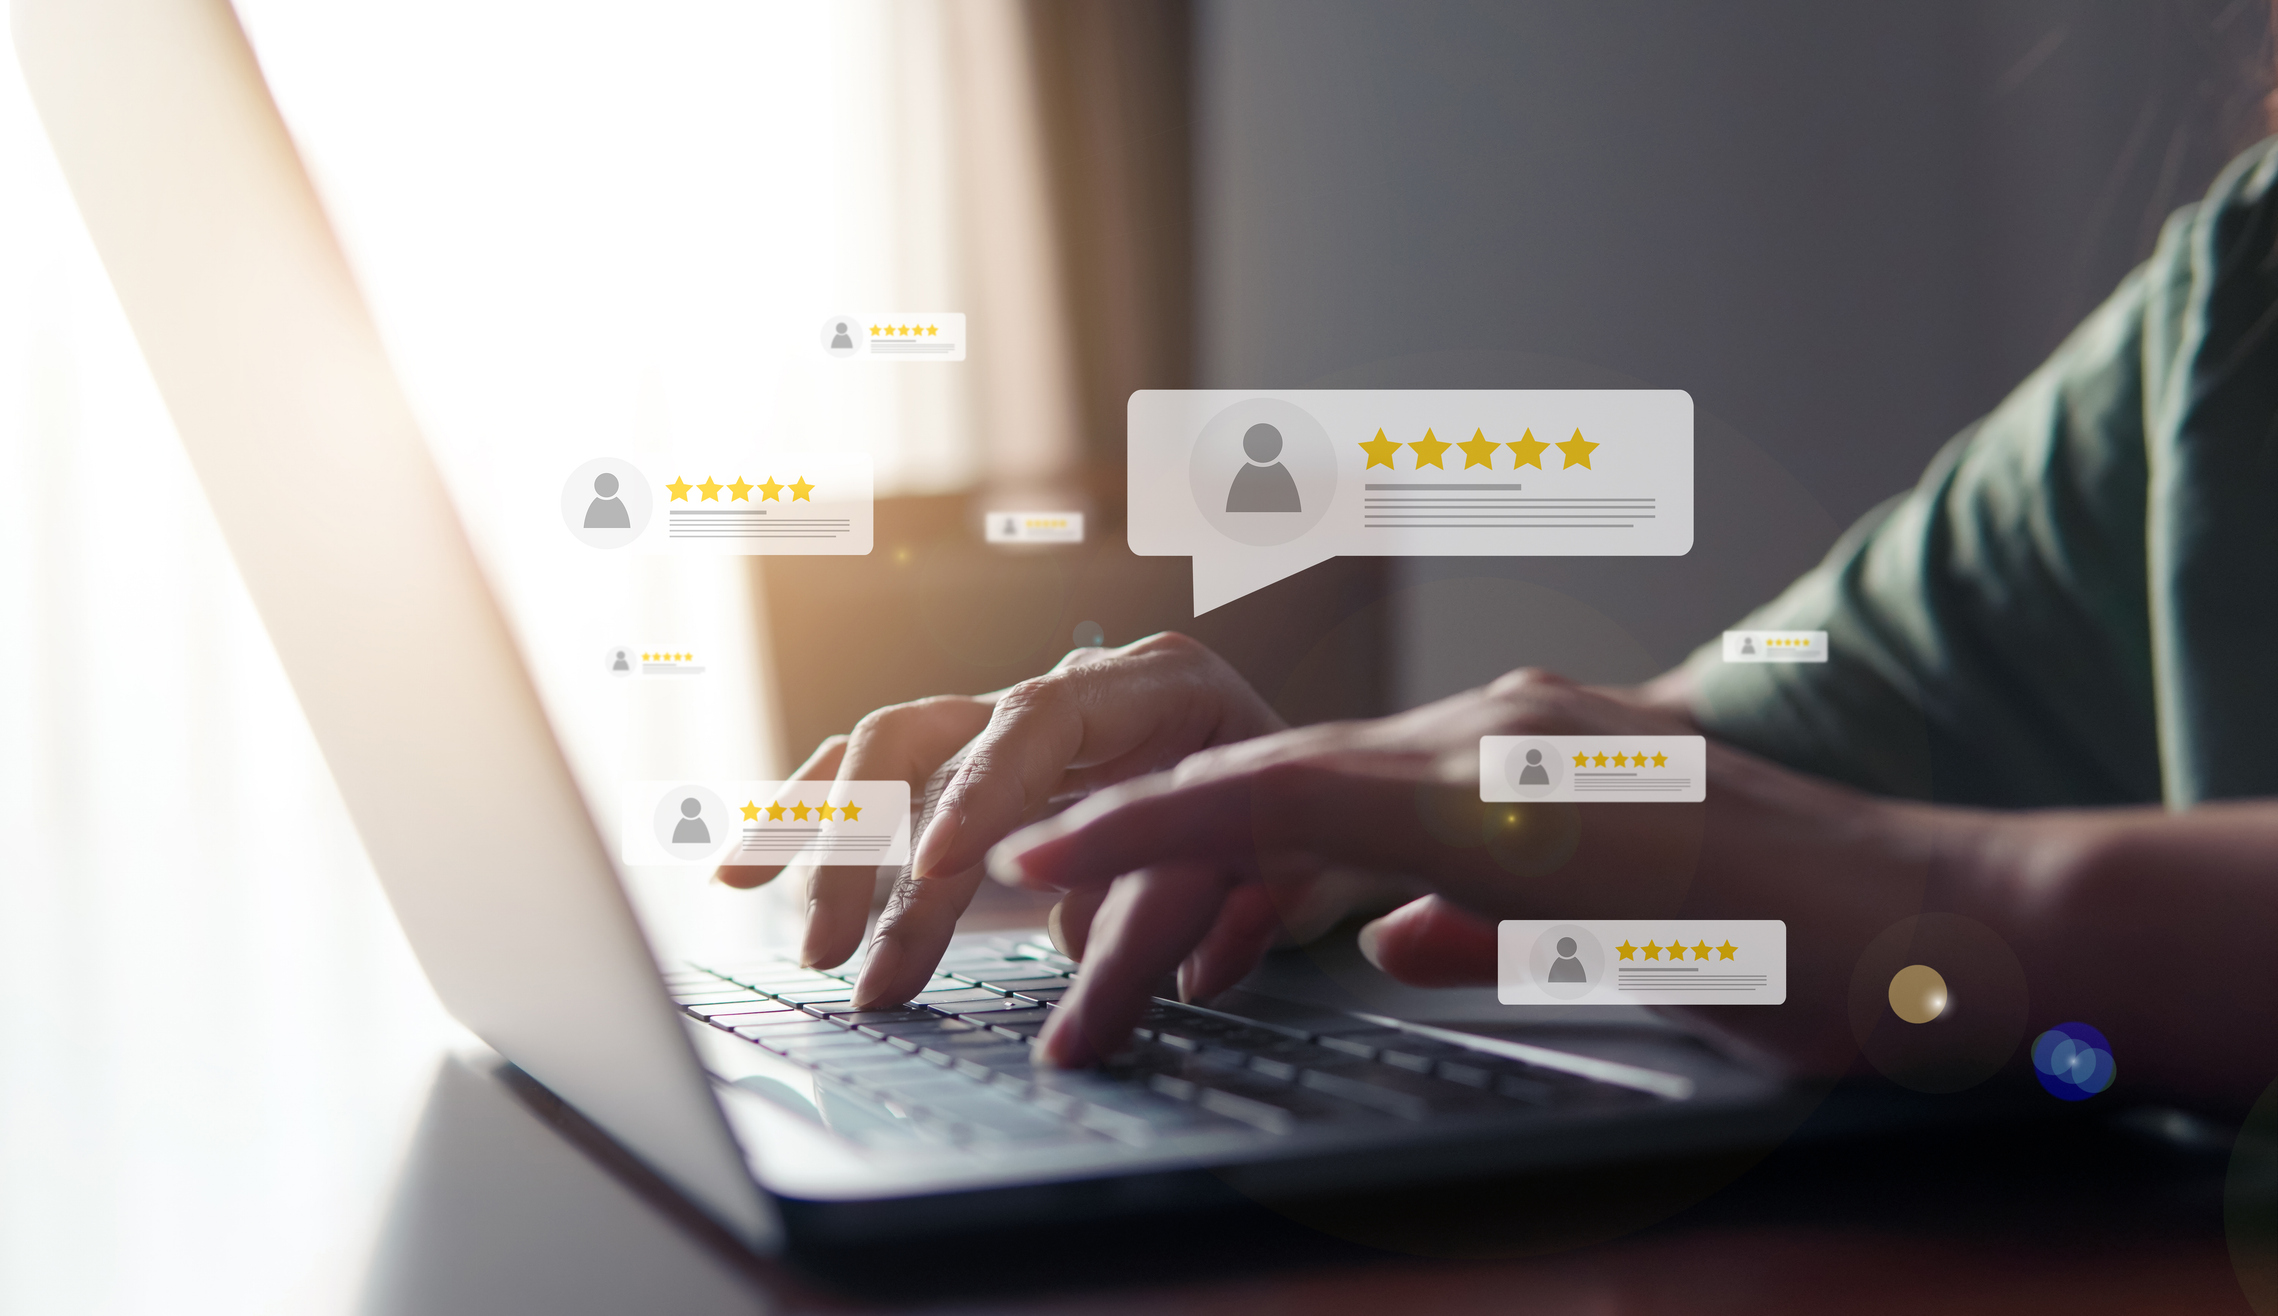 Stock image of a person's hands typing on a laptop with overlaid graphics of 5-star reviews on top.